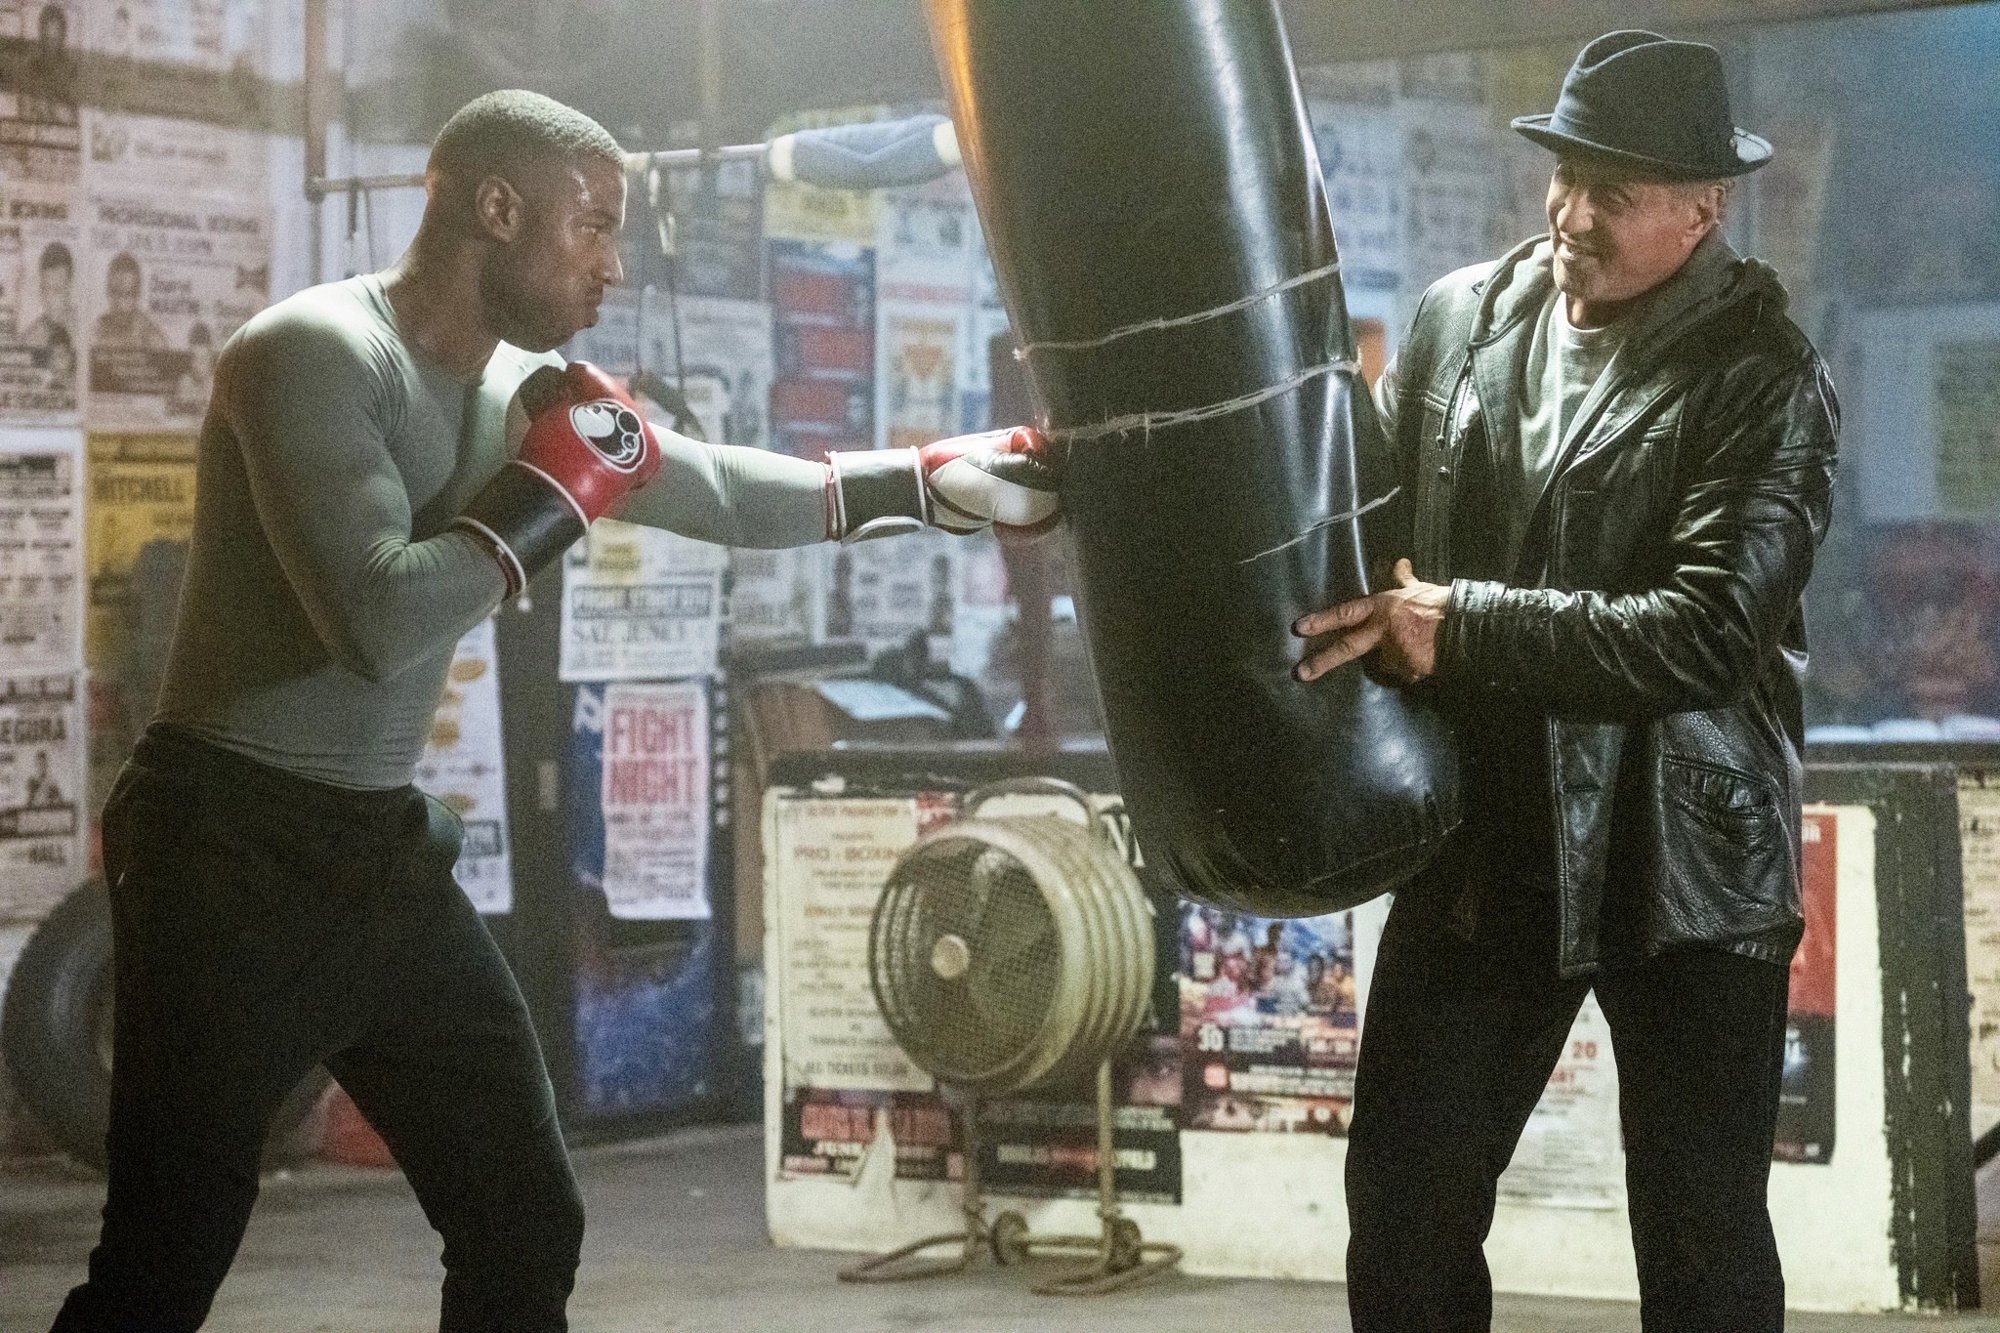 Michael B. Jordan stars as Adonis Johnson and Sylvester Stallone stars as Rocky Balboa in MGM's Creed II (2018)